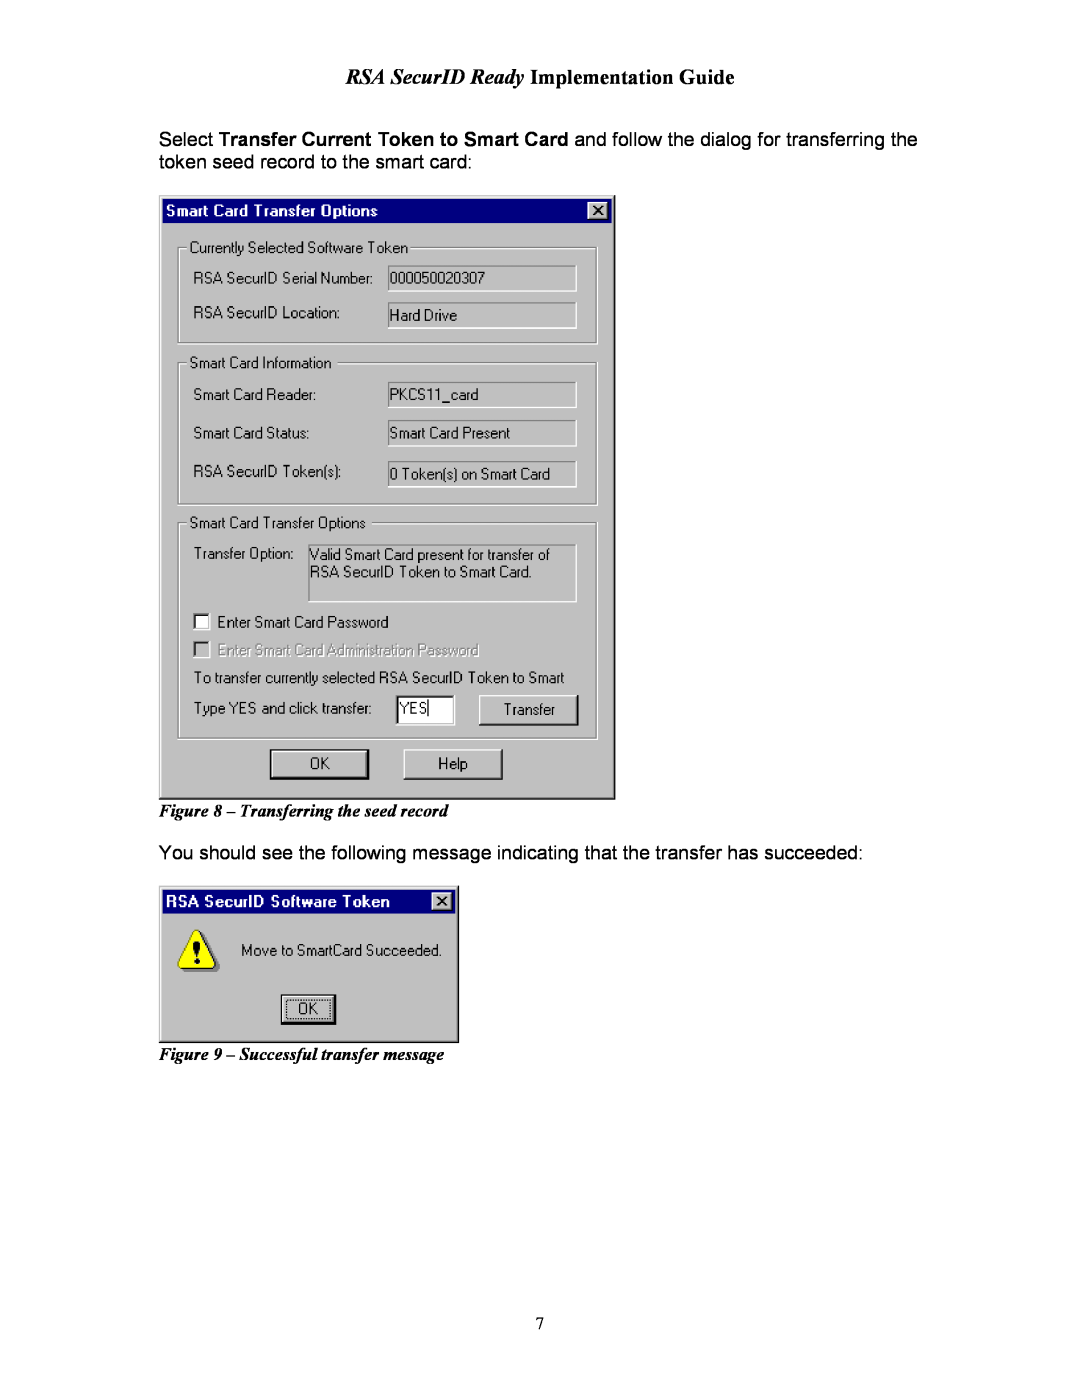 Rainbow Technologies 2000 manual RSA SecurID Ready Implementation Guide, Transferring the seed record 